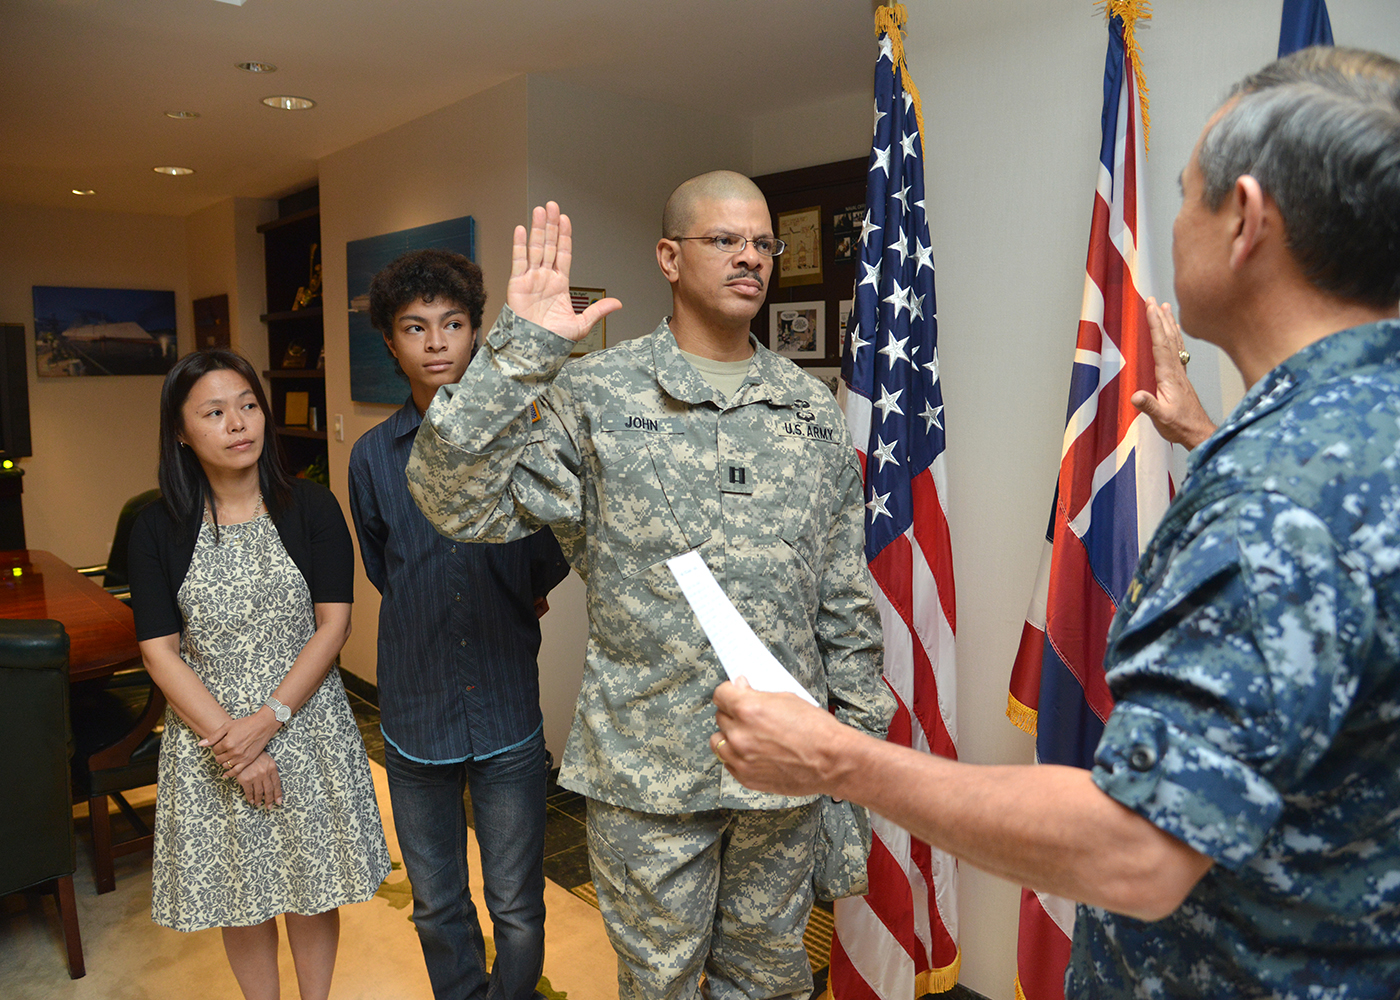 Army Maj. Anthony E. John, Command Safety Officer, USAR TSG-P reaffirms the commissioned officers oath of office right before he was officially pinned to his current rank by Adm. Harry B. Harris Jr., commander, U.S. Pacific Fleet, while his wife, Yuki, and son, Paul, look on during a promotion ceremony held at US PACFLT Headquarters, Pearl Harbor, Hawaii, on Nov. 25, 2013. (Photo provided by MC1 Amanda Dunford, PACFLT PAO)